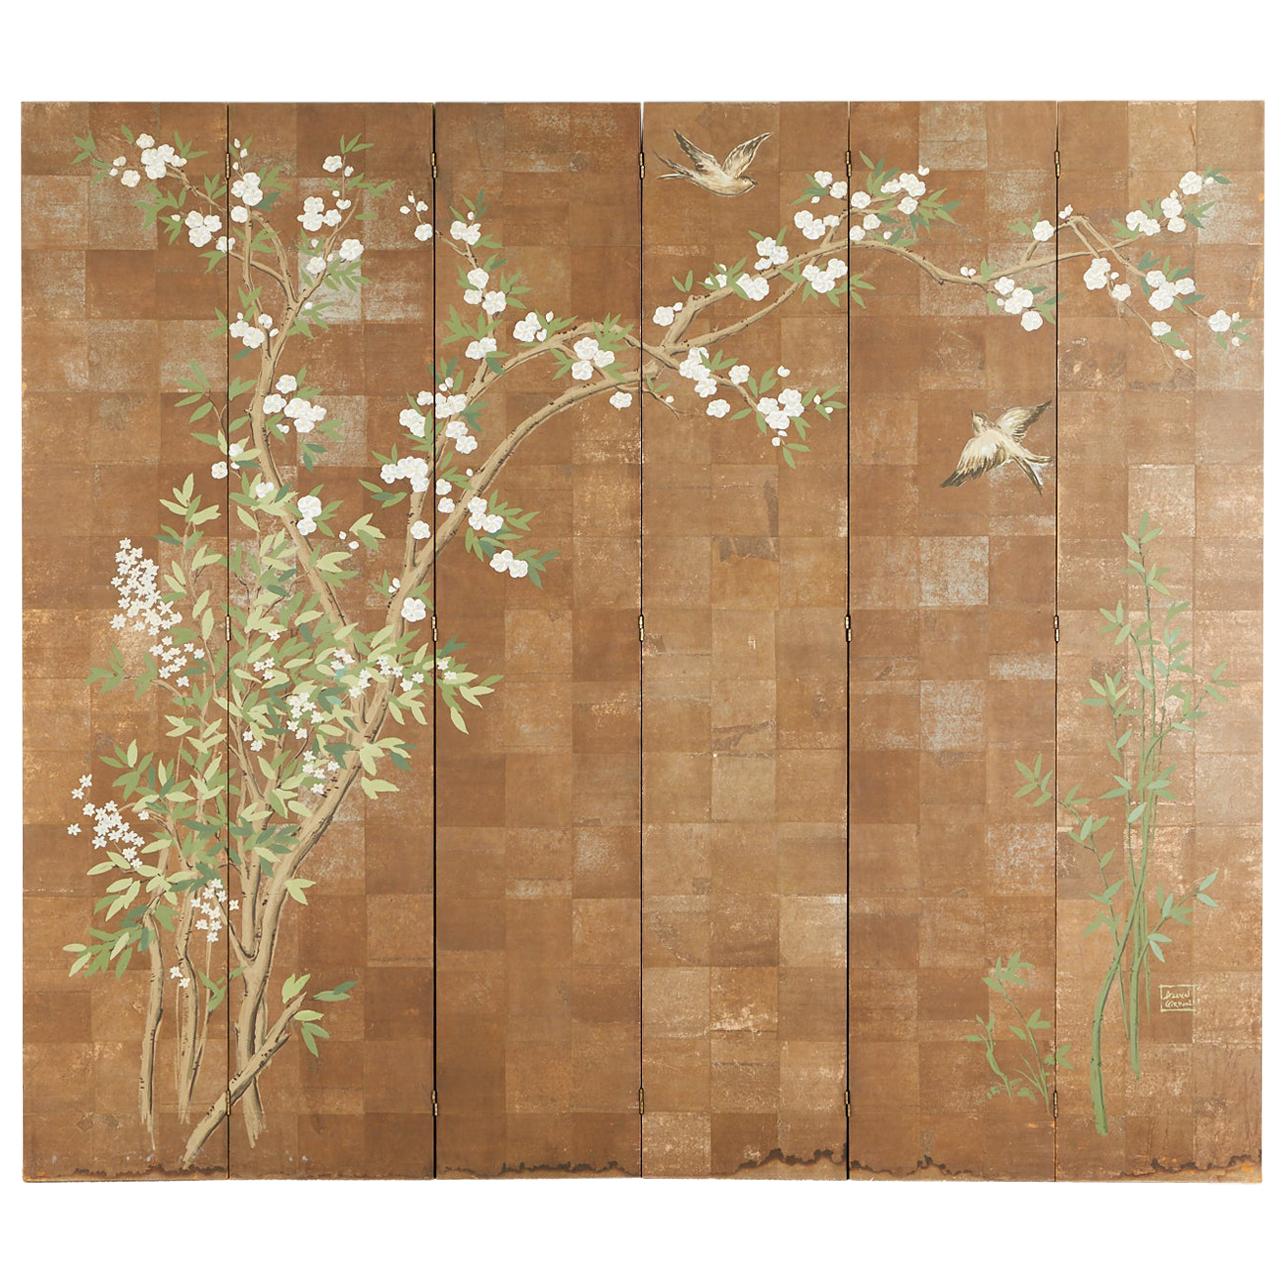 Chinoiserie Six-Panel Screen Inspired by Robert Crowder